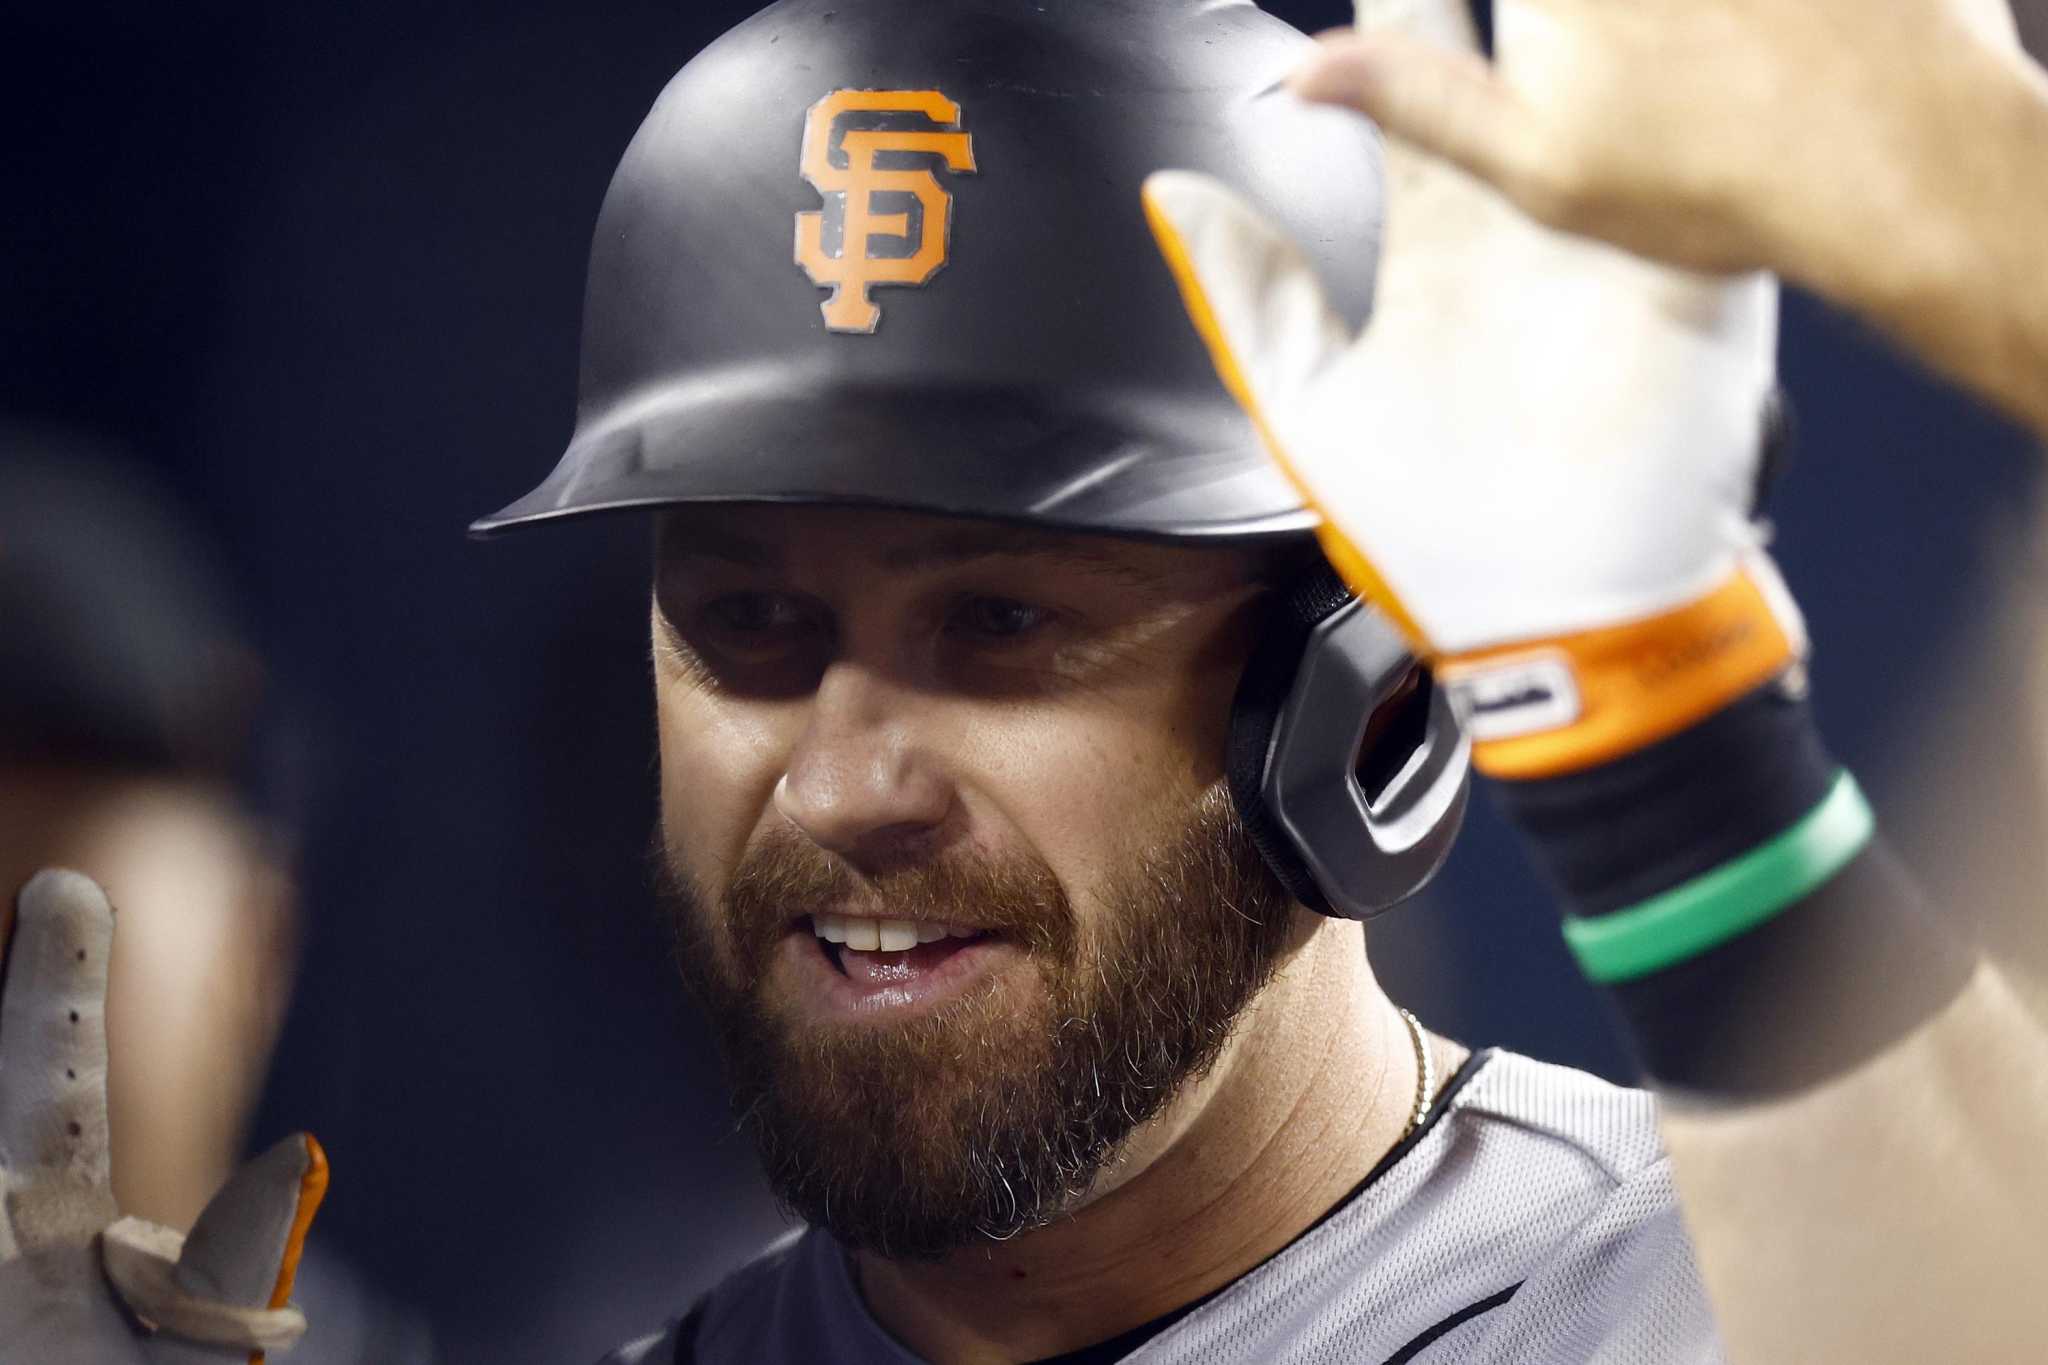 Giants Evan Longoria out for six weeks - McCovey Chronicles